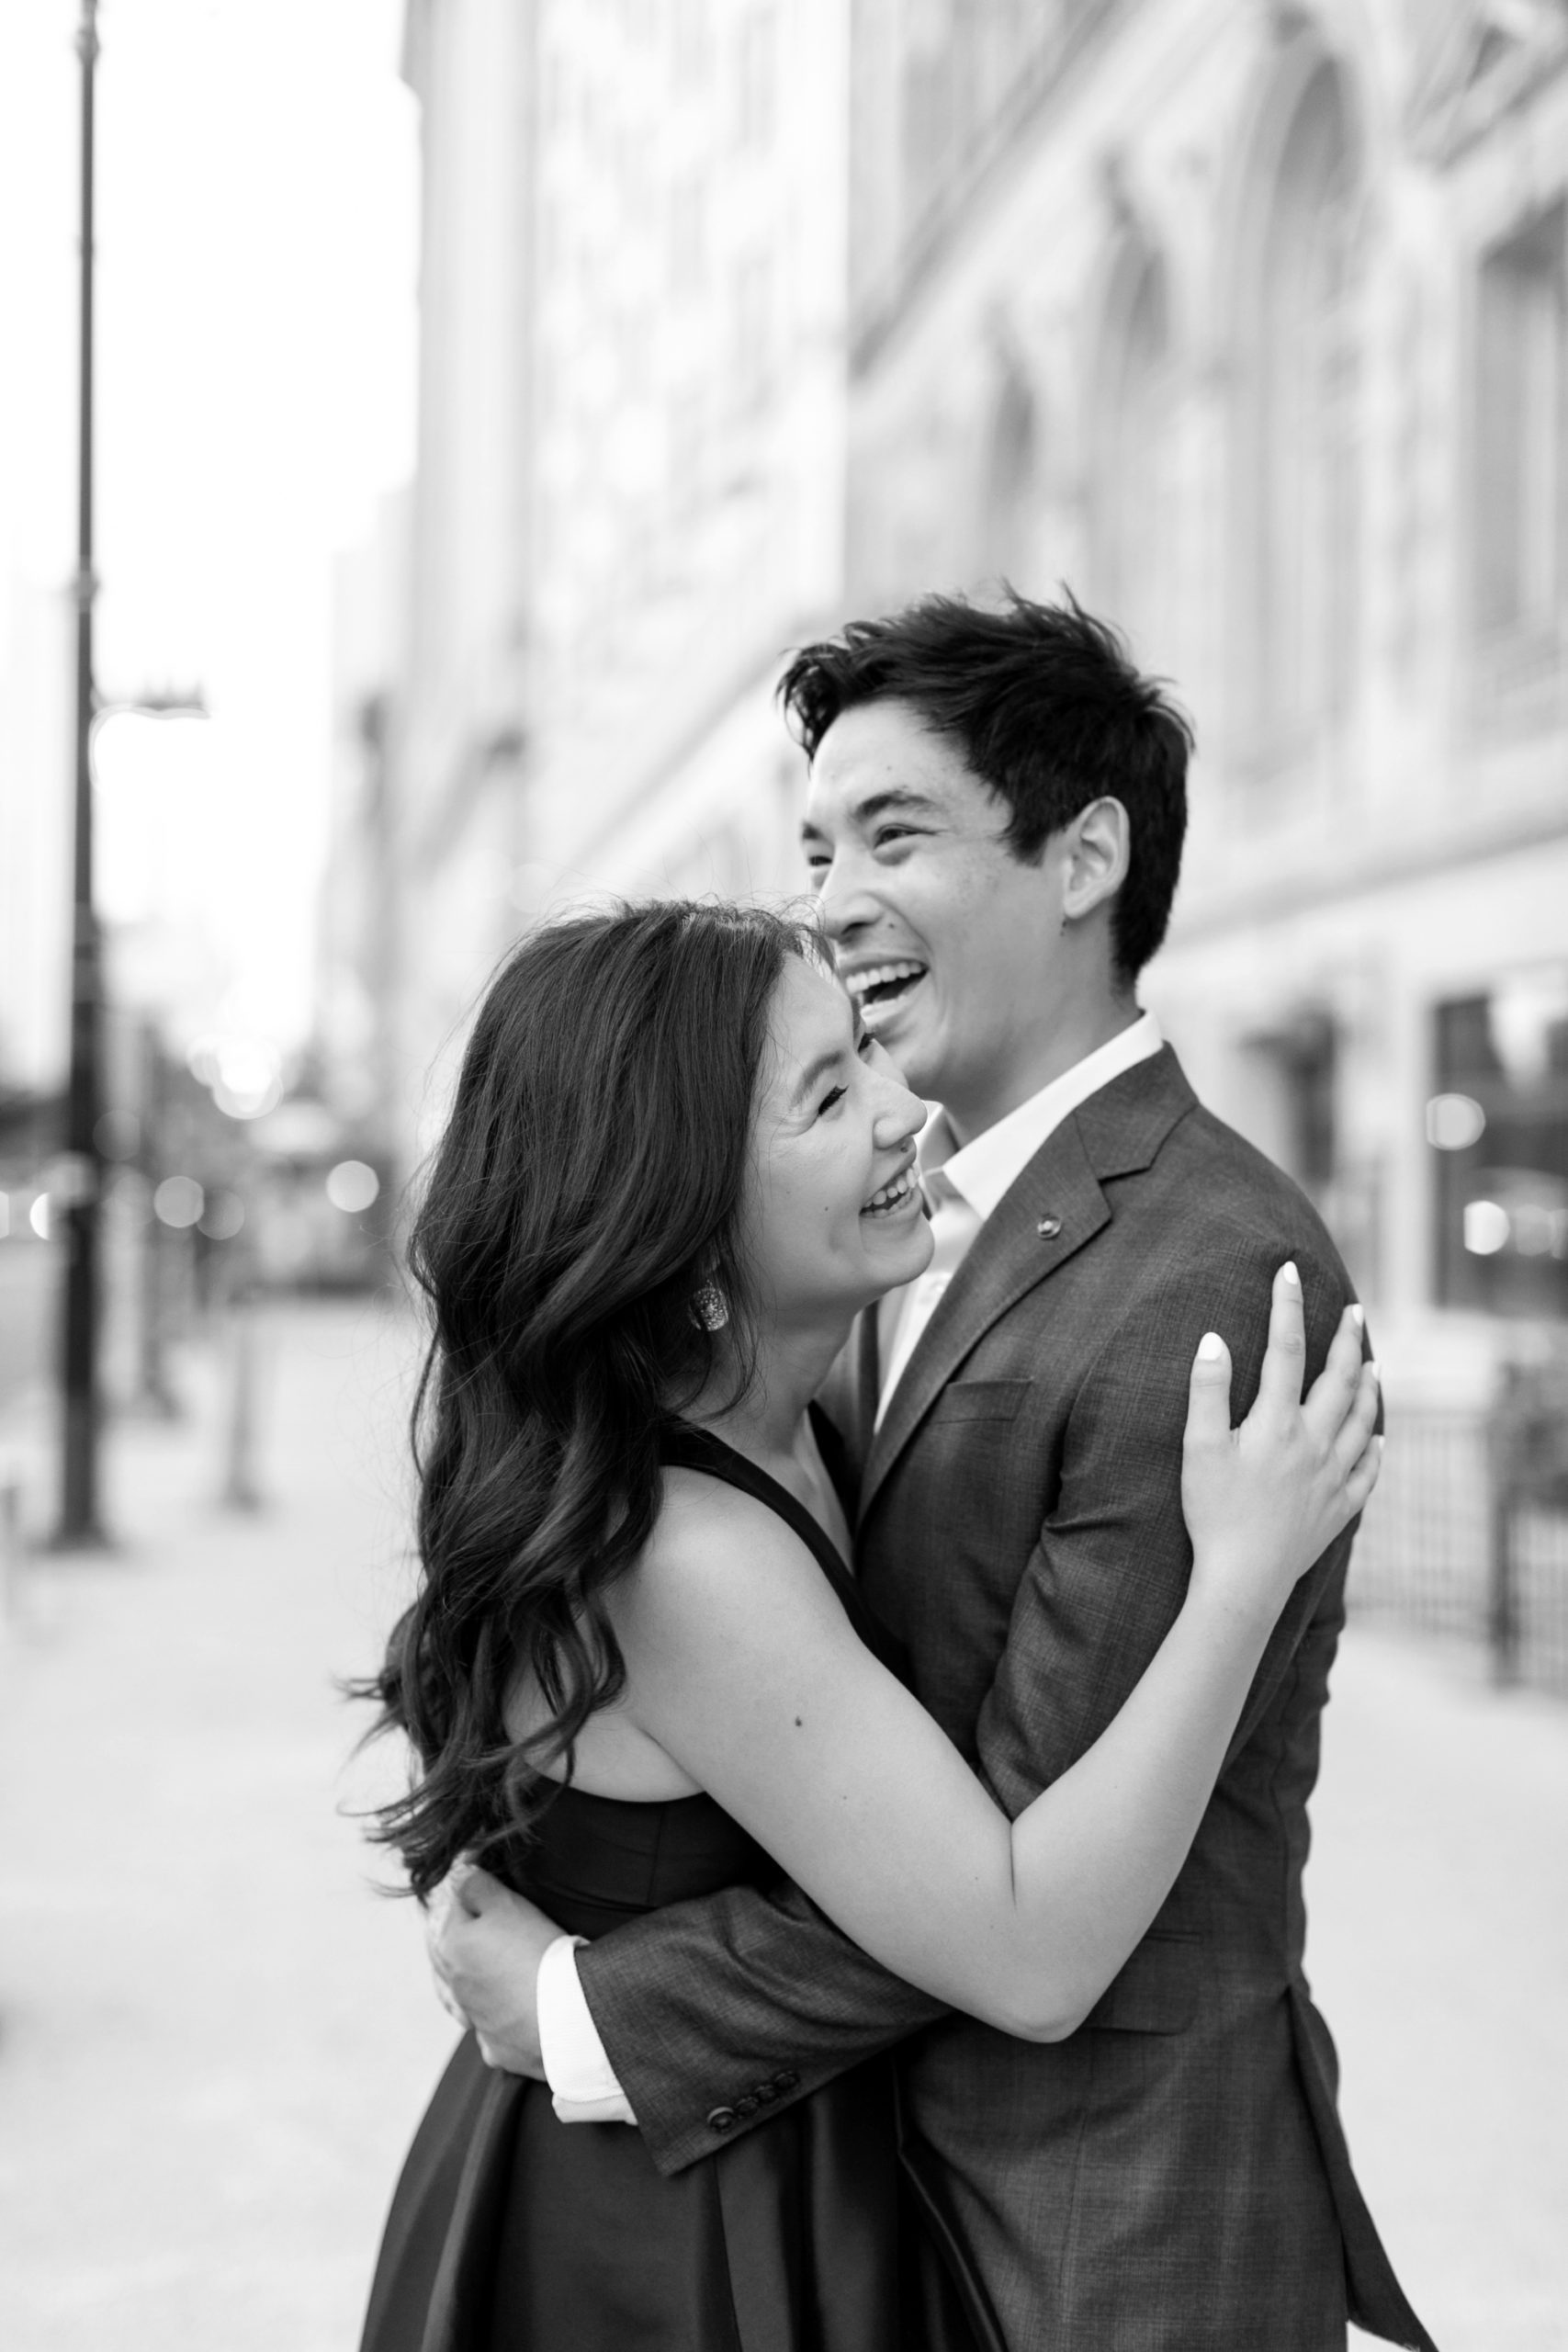 the man and woman laughed during their downtown Chicago summer engagement photos